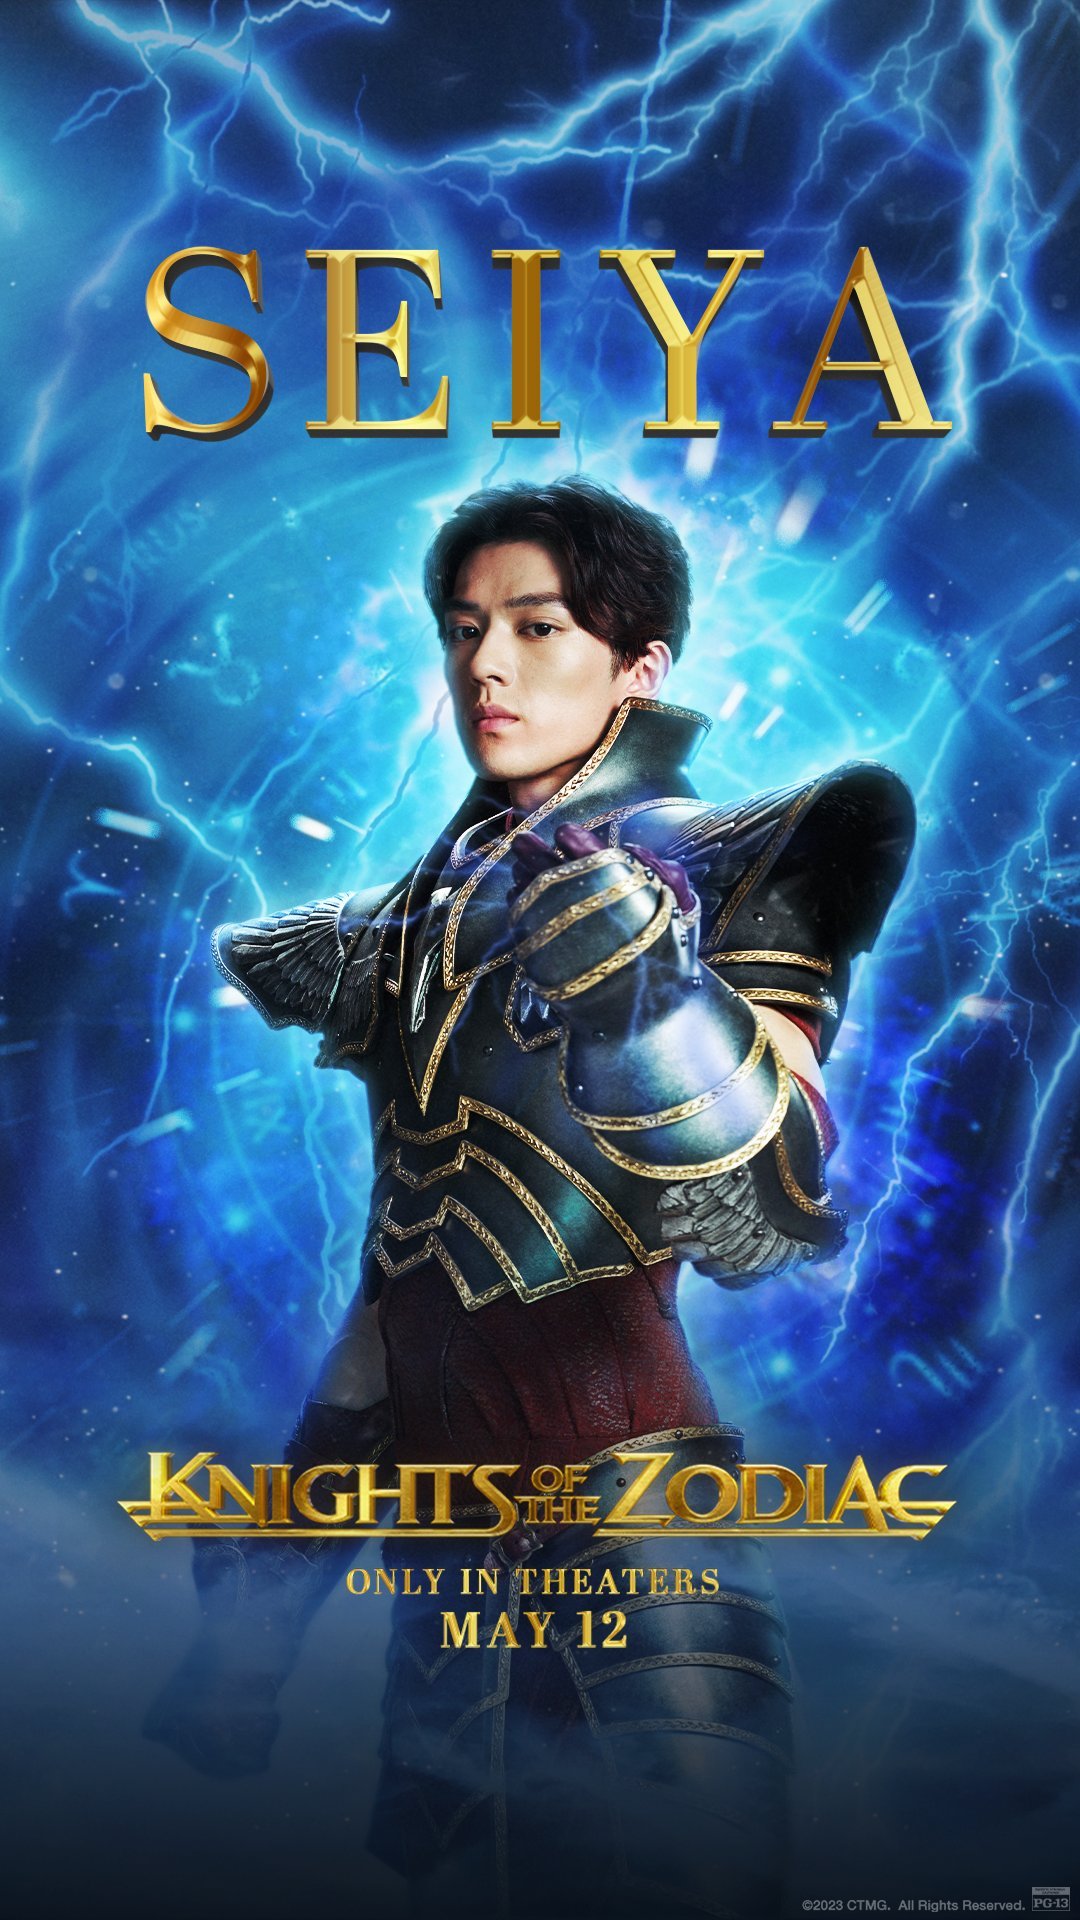 Knights of the Zodiac Live Action Film are Gods among us and Heroes within us